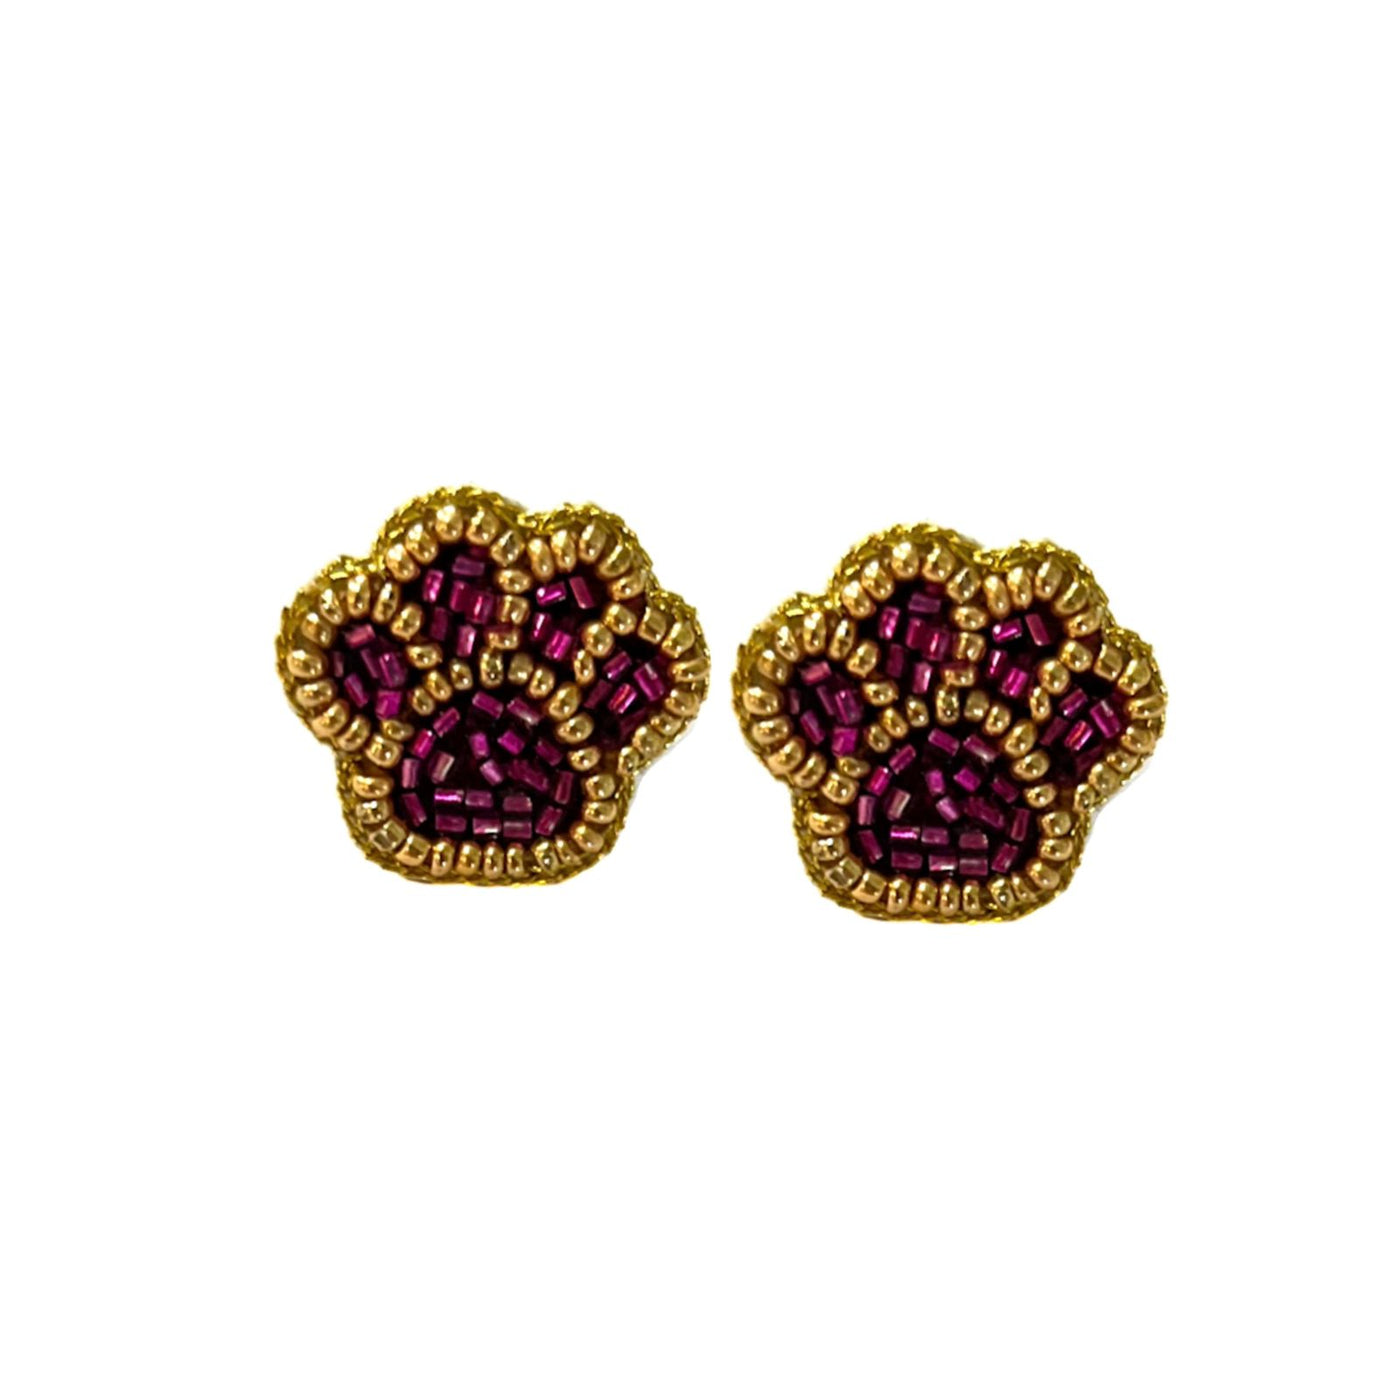 Tiger Paw Earrings - Purple and Gold